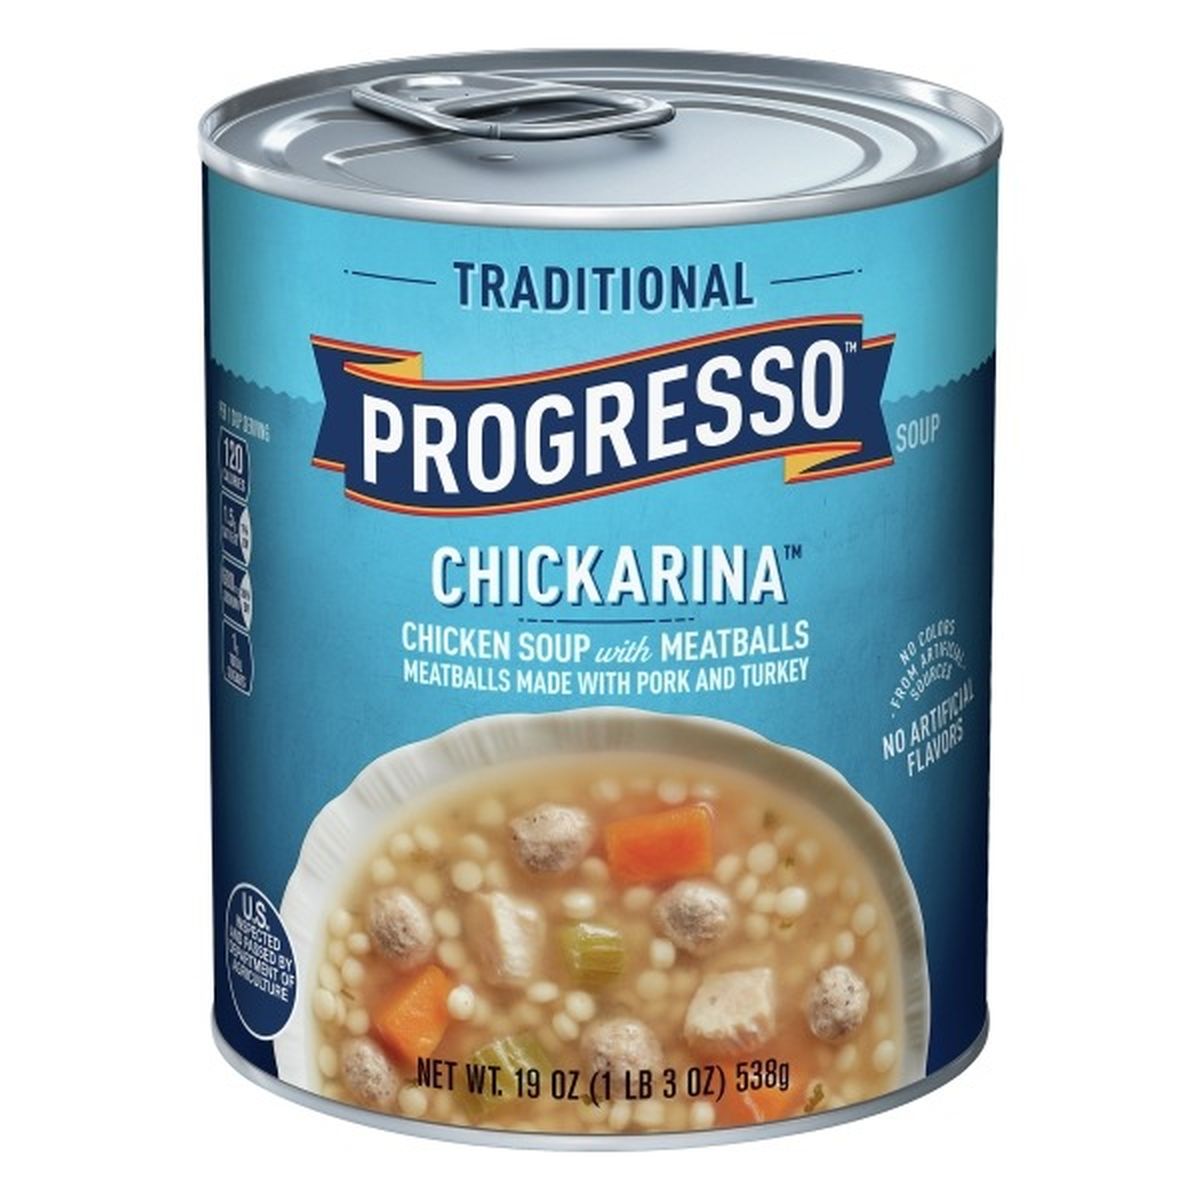 Calories in Progresso Chickarina Soup, Chicken Soup, with Meatballs